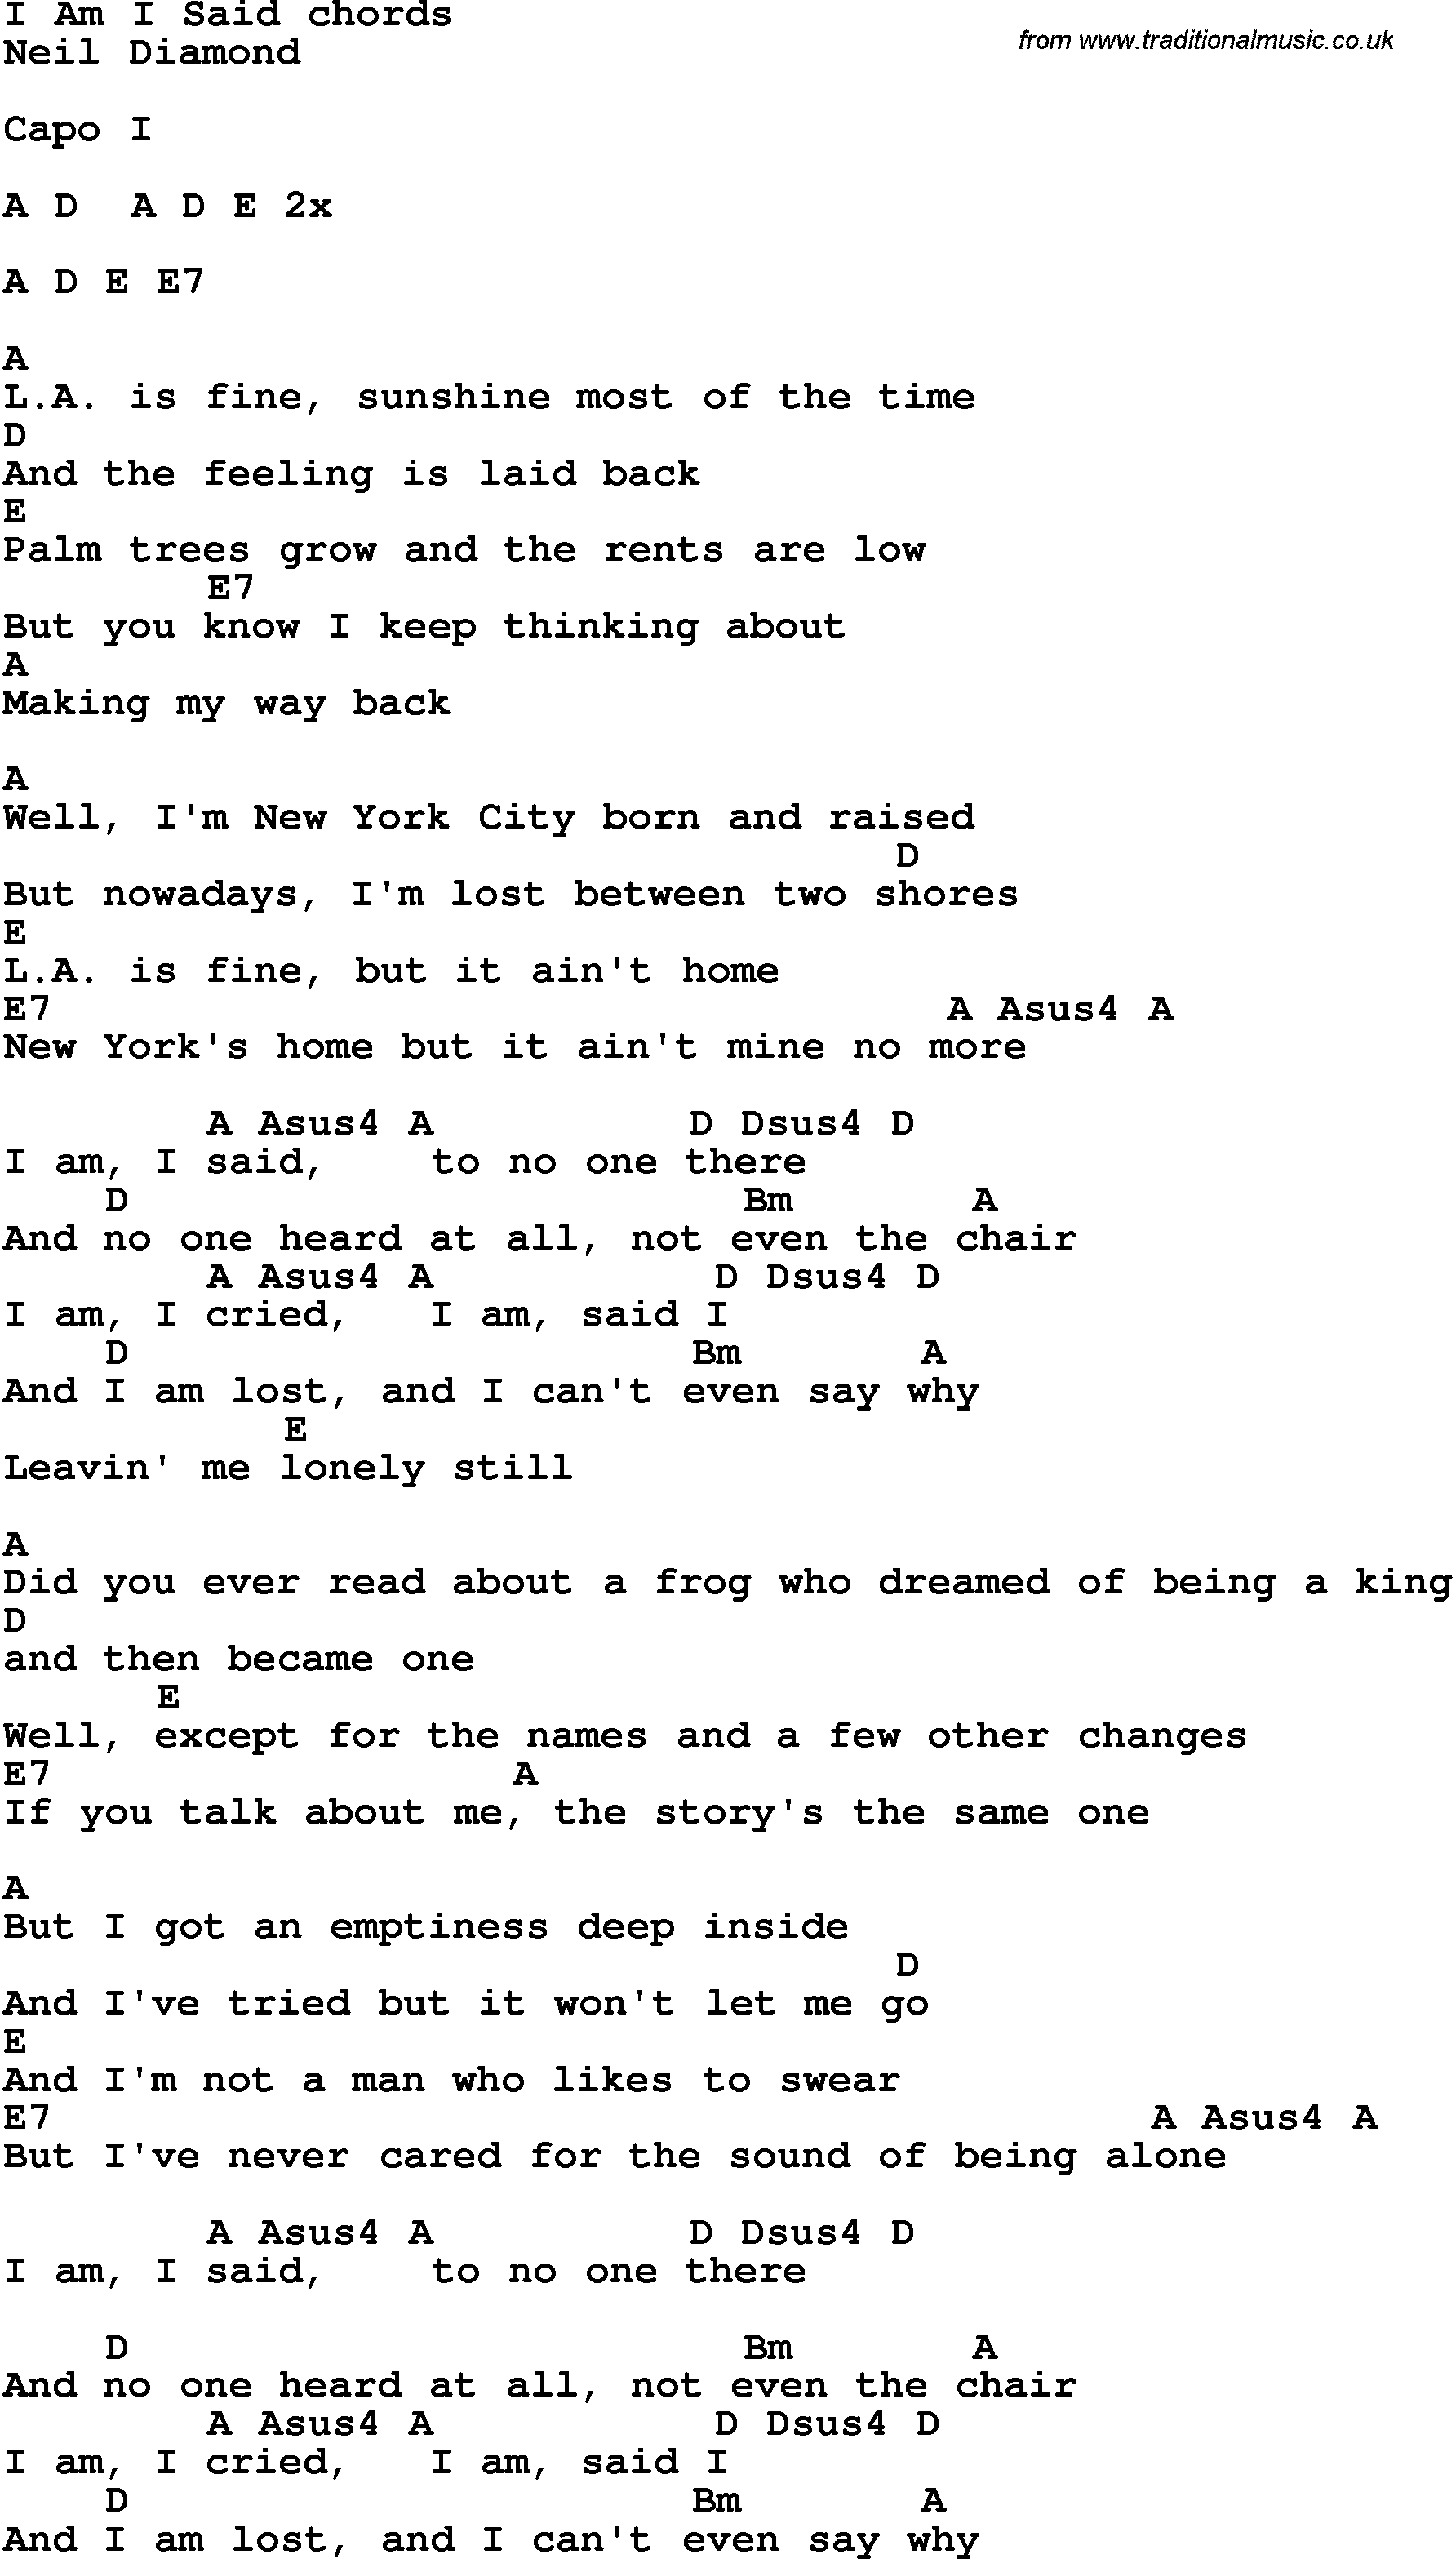 Song Lyrics with guitar chords for I Am I Said